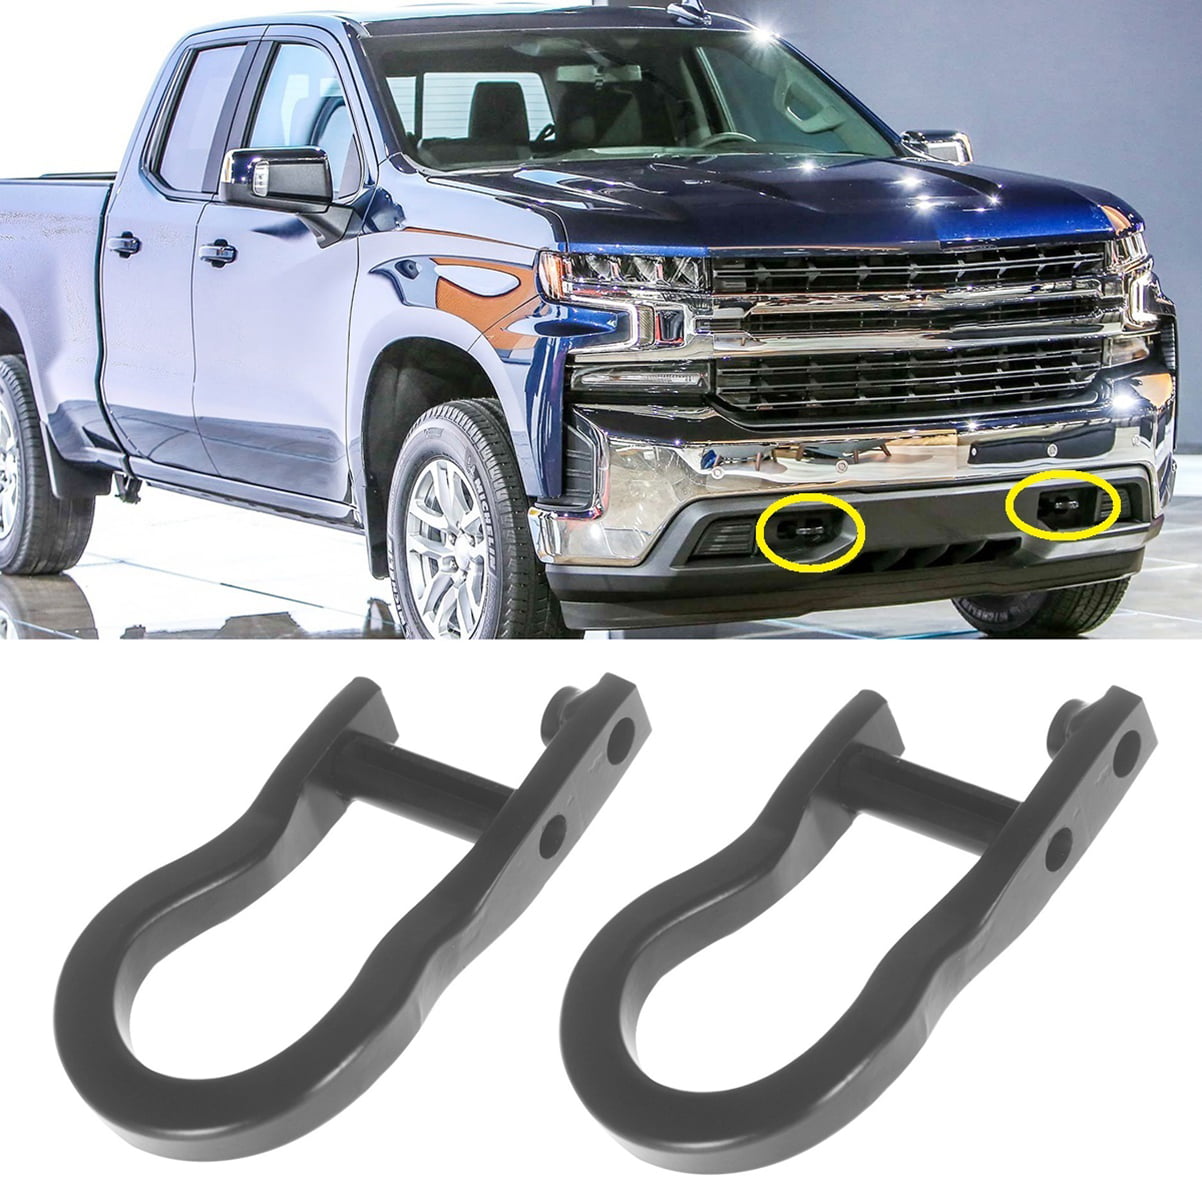 SINTLY Front Tow Hooks Ring Compatible for 2007-2019 Chevy Silverado GMC Sierra 1500 Replace 84192871 Black Front Lower Bumper Trailer Ring Steel Alloy 